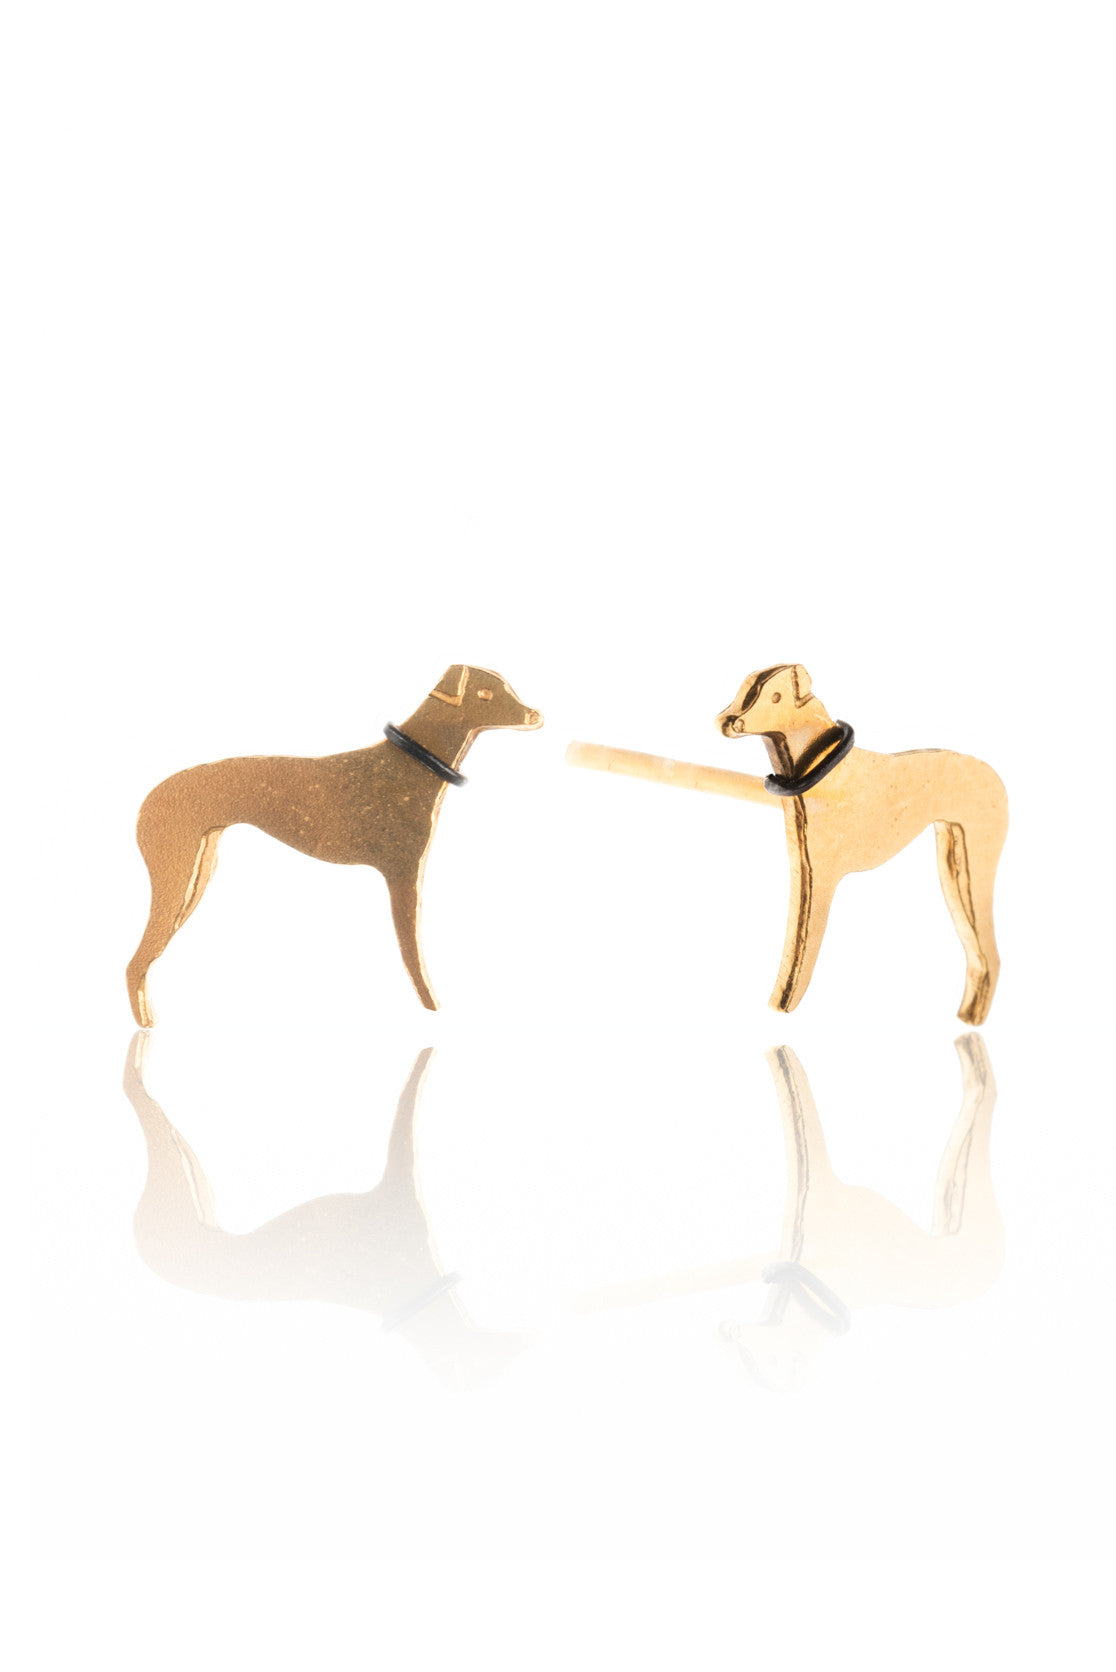 Gold plated greyhound stud earrings with contrasting black collar. 